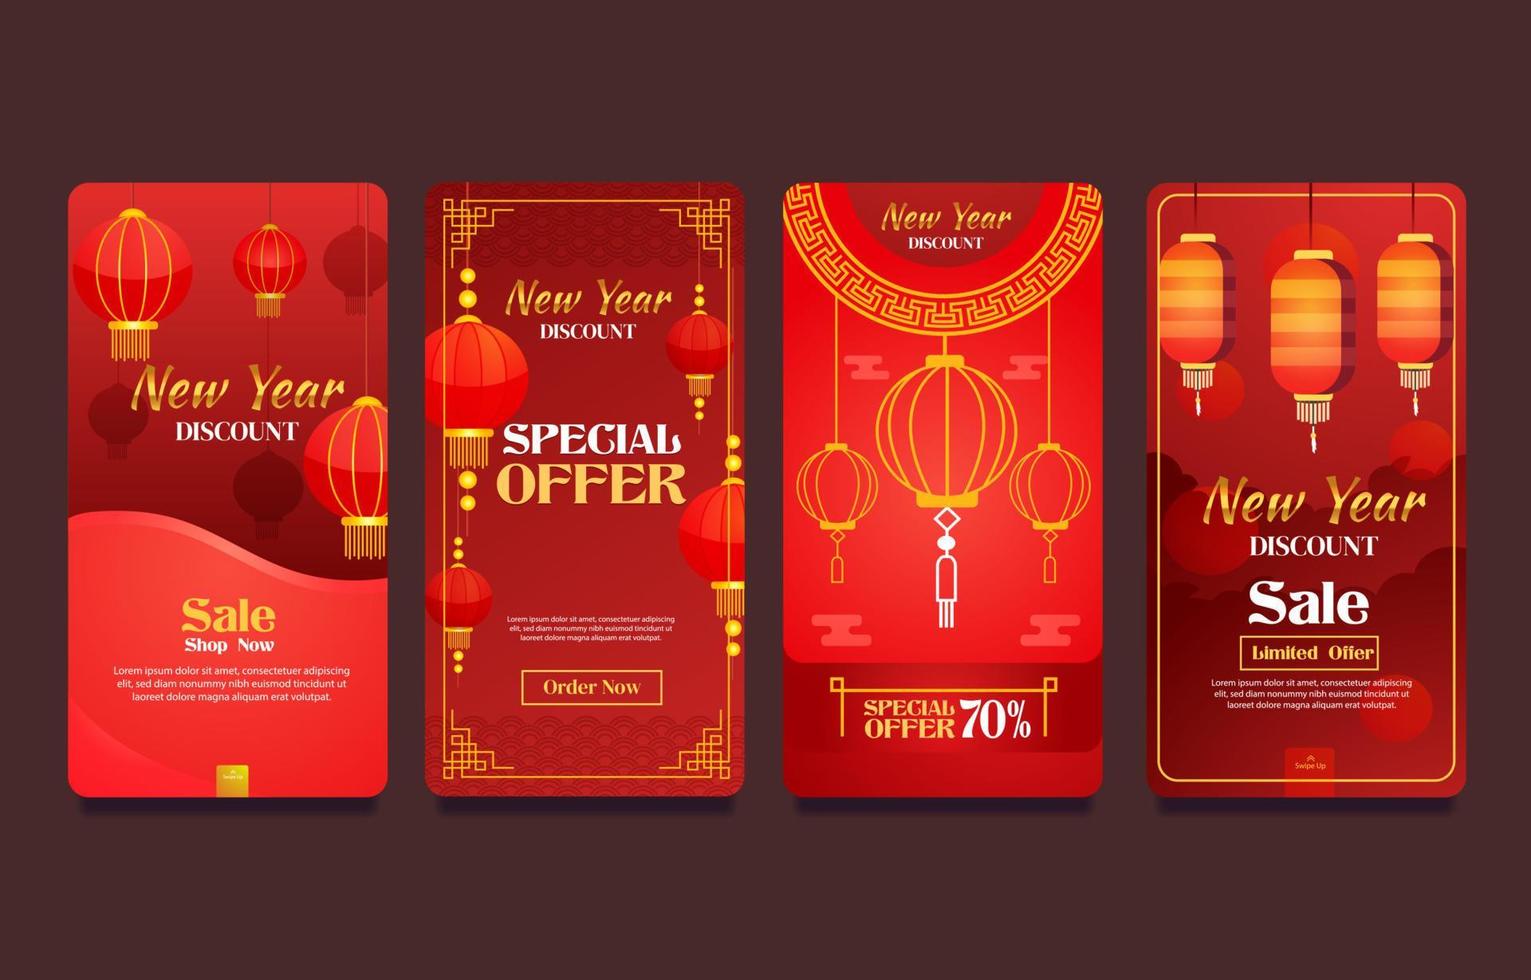 Chinese New Year Promotion Template with Red Lanterns vector